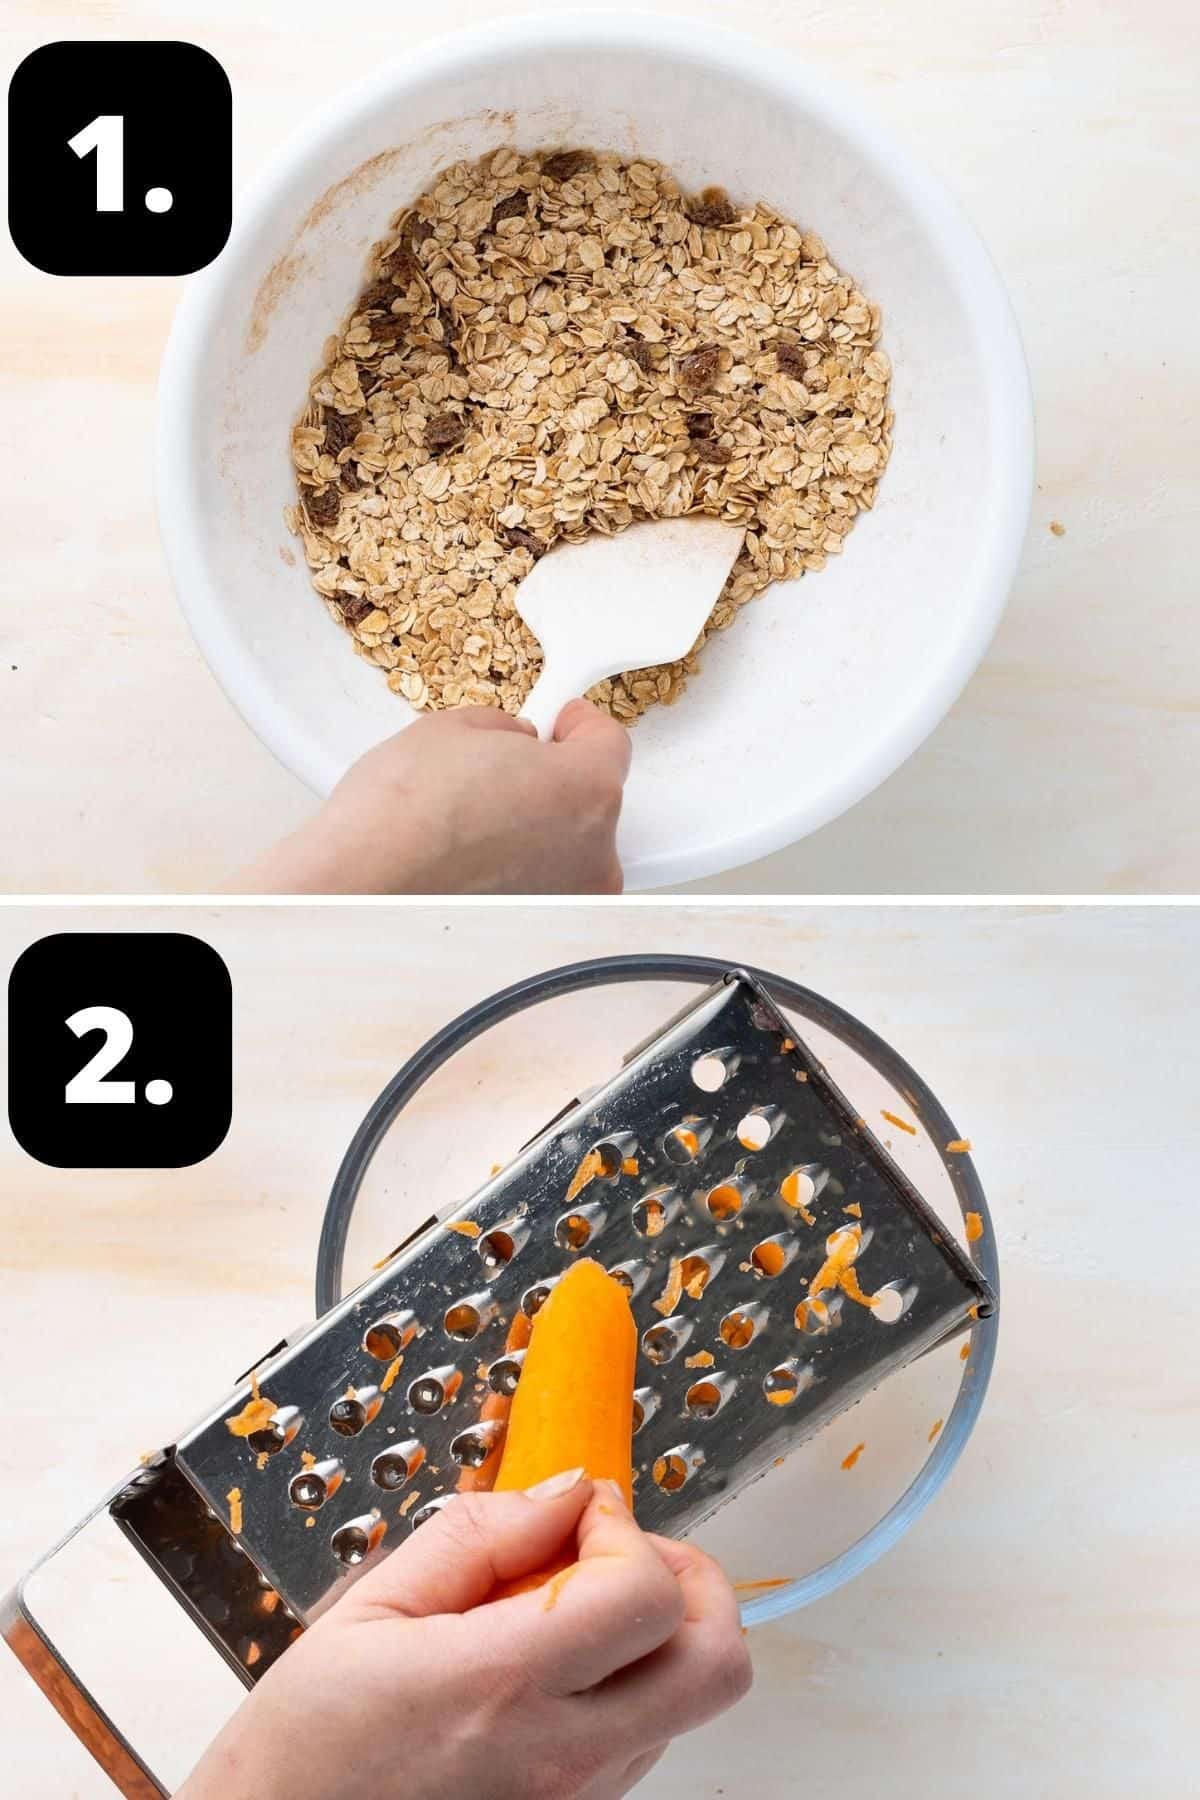 Steps 1-2 of preparing this recipe - mixing the dry ingredients in a bowl and grating the carrots on a box grater.